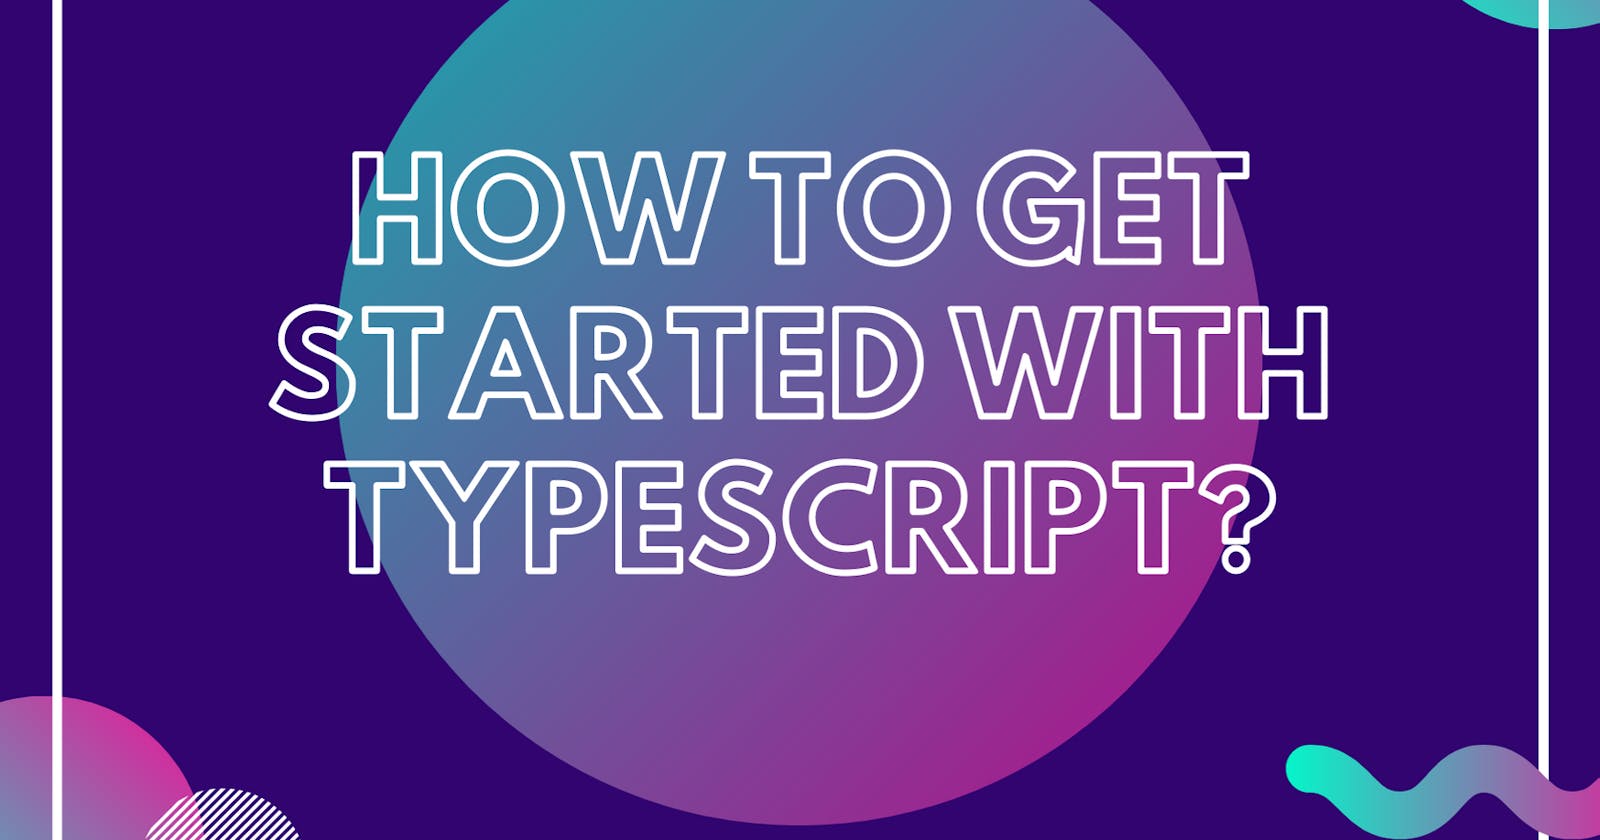 AMA Mentoring - How to Get Started with TypeScript?